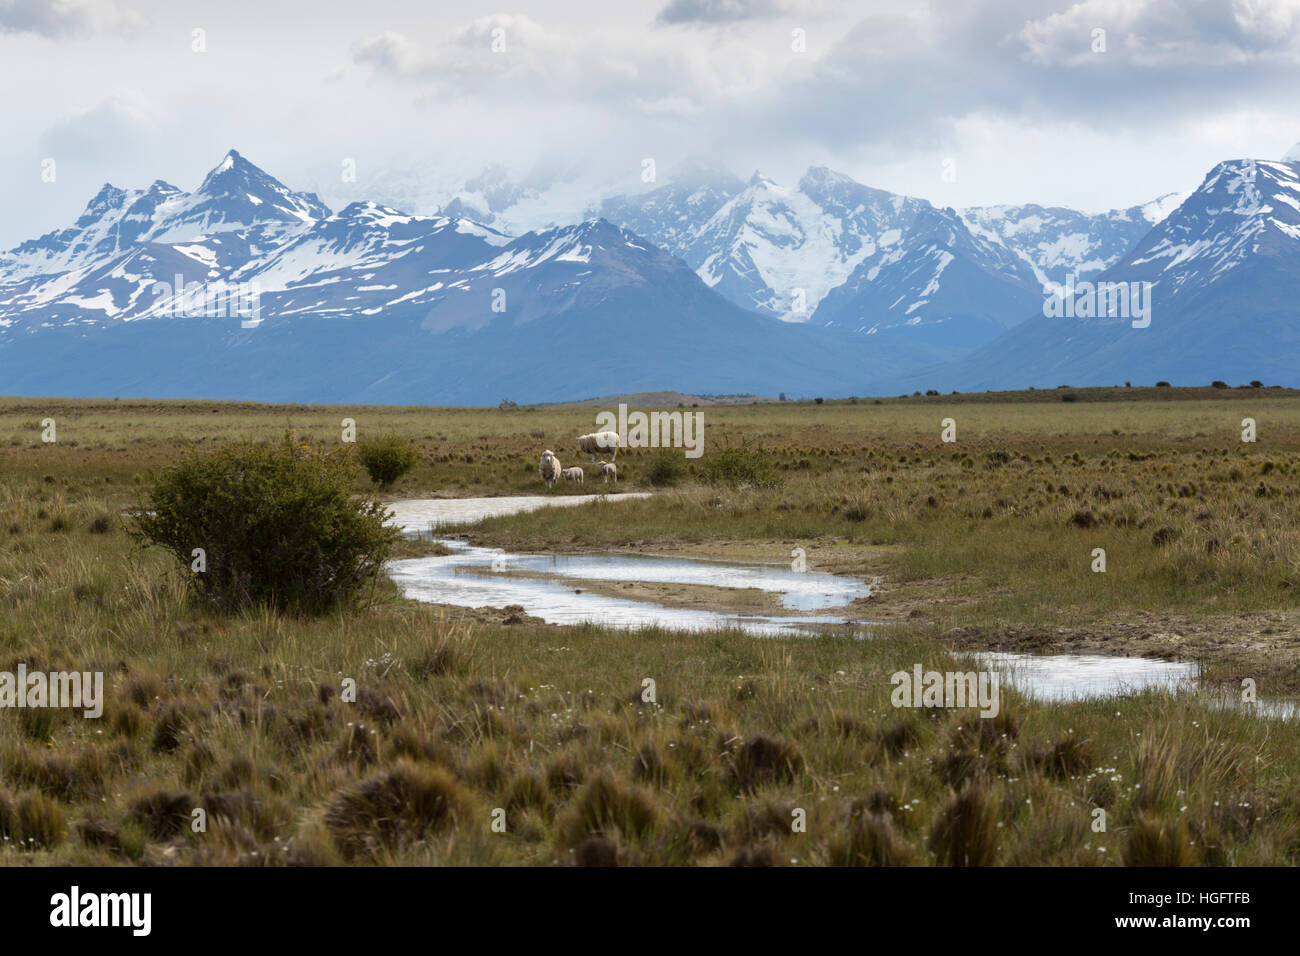 River and sheep below the Andes mountain range, Estancia Alta Vista to The Andes, El Calafate, Patagonia, Argentina, South America Stock Photo